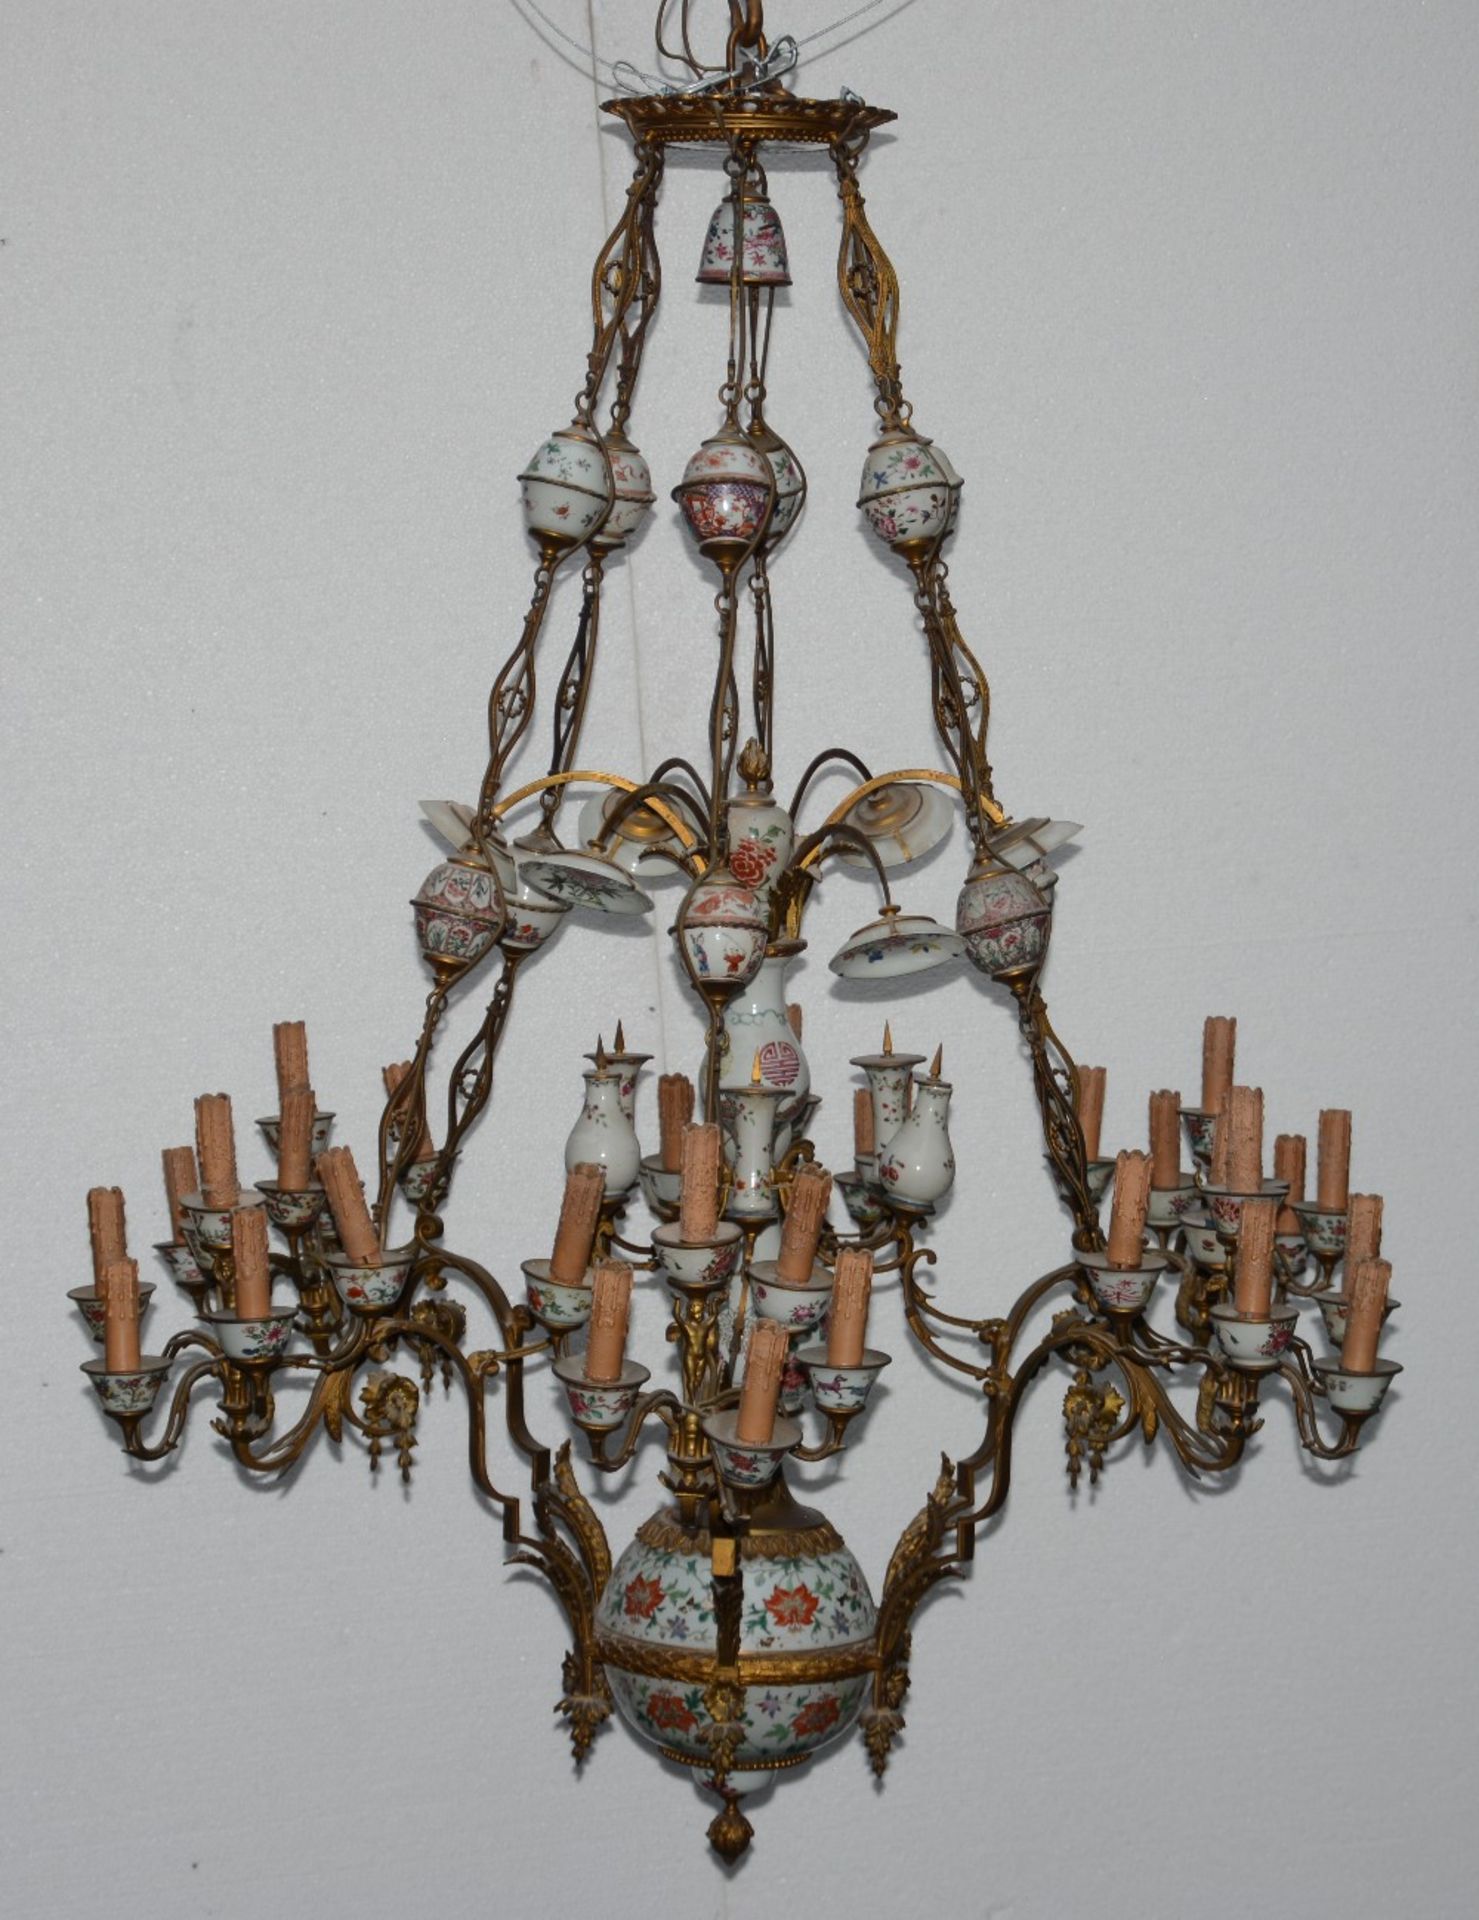 A rare late 19thC chandelier with Neo-classical bronze mounts, integrated with mid-18thC Chinese